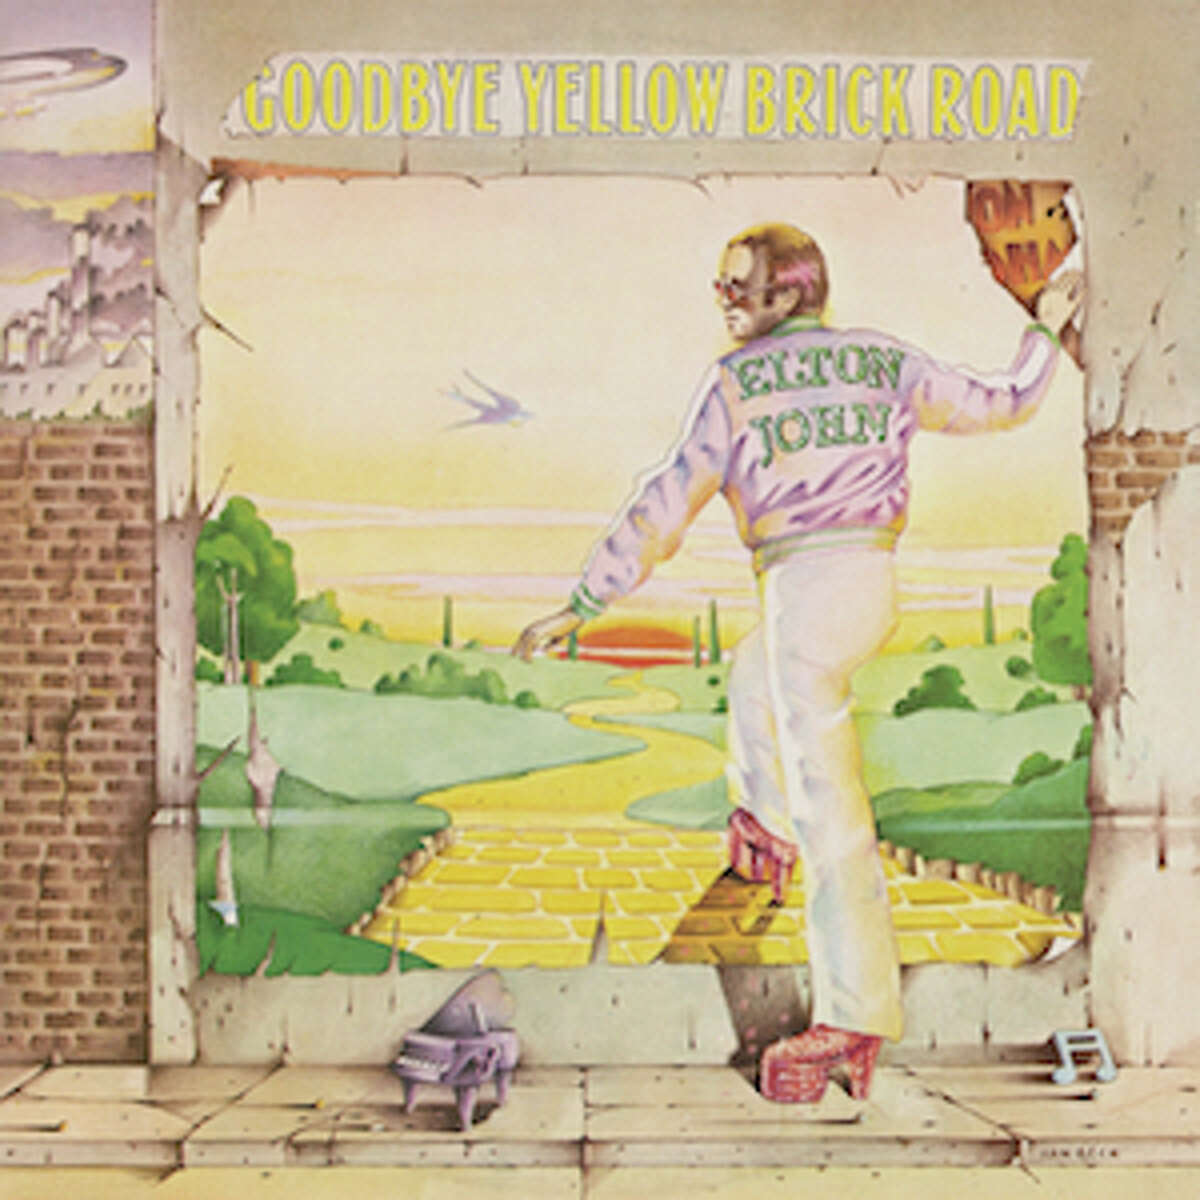 Elton John's “Goodbye Yellow Brick Road” reached No. 1 a month after its Oct. 5, 1973, release and stayed there for the rest of the year.